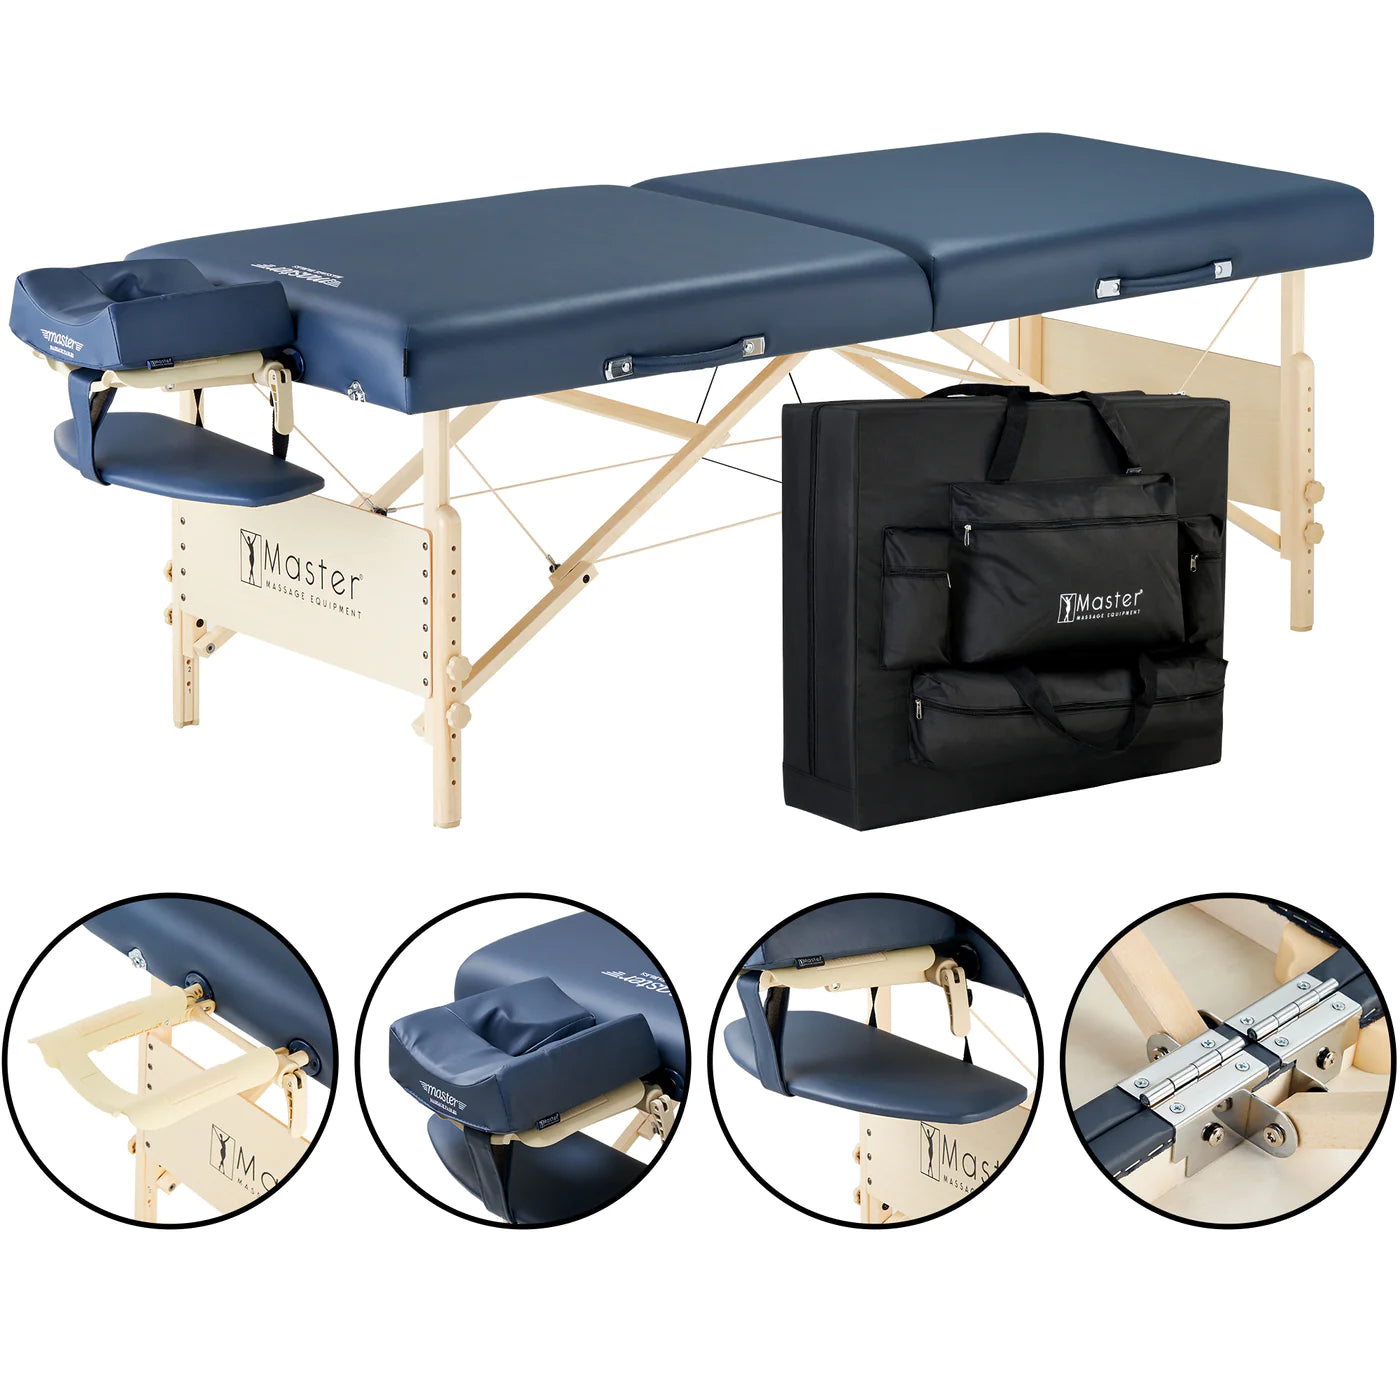 30" CORONADO™ SALON Portable Massage Table Package with Lift Back Action & a Stout 3" of Our High-density Multi-Layer Small Cell™ Foam! (Royal Blue Color)